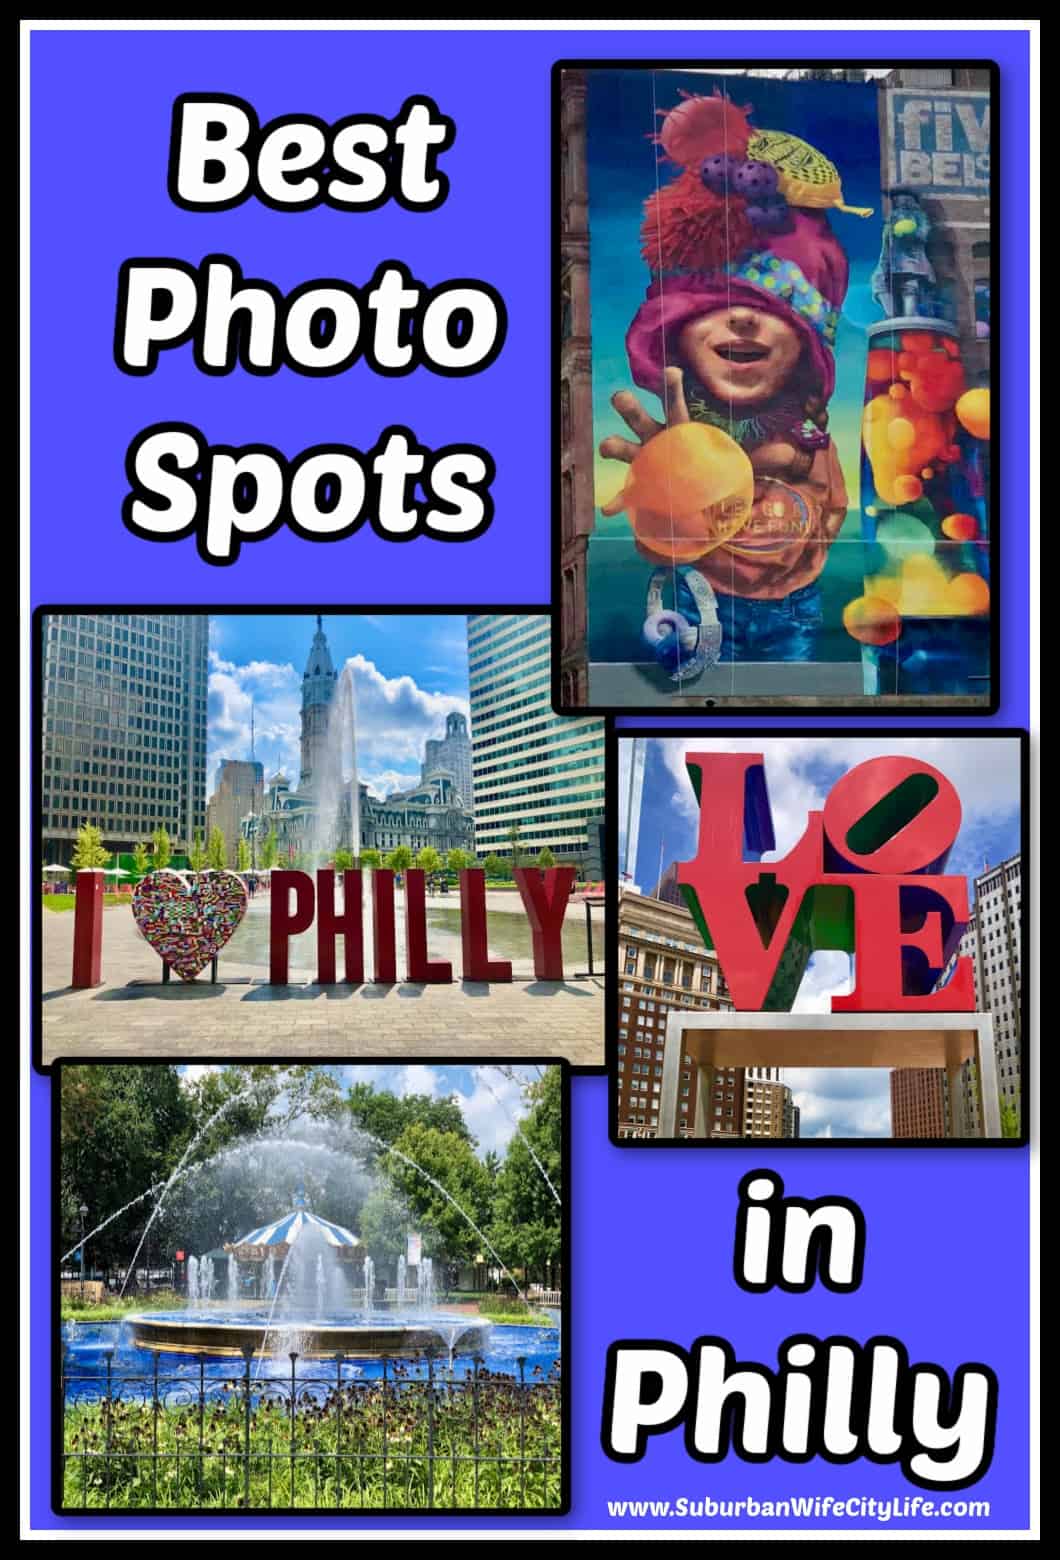 Best Photo Spots in Philly